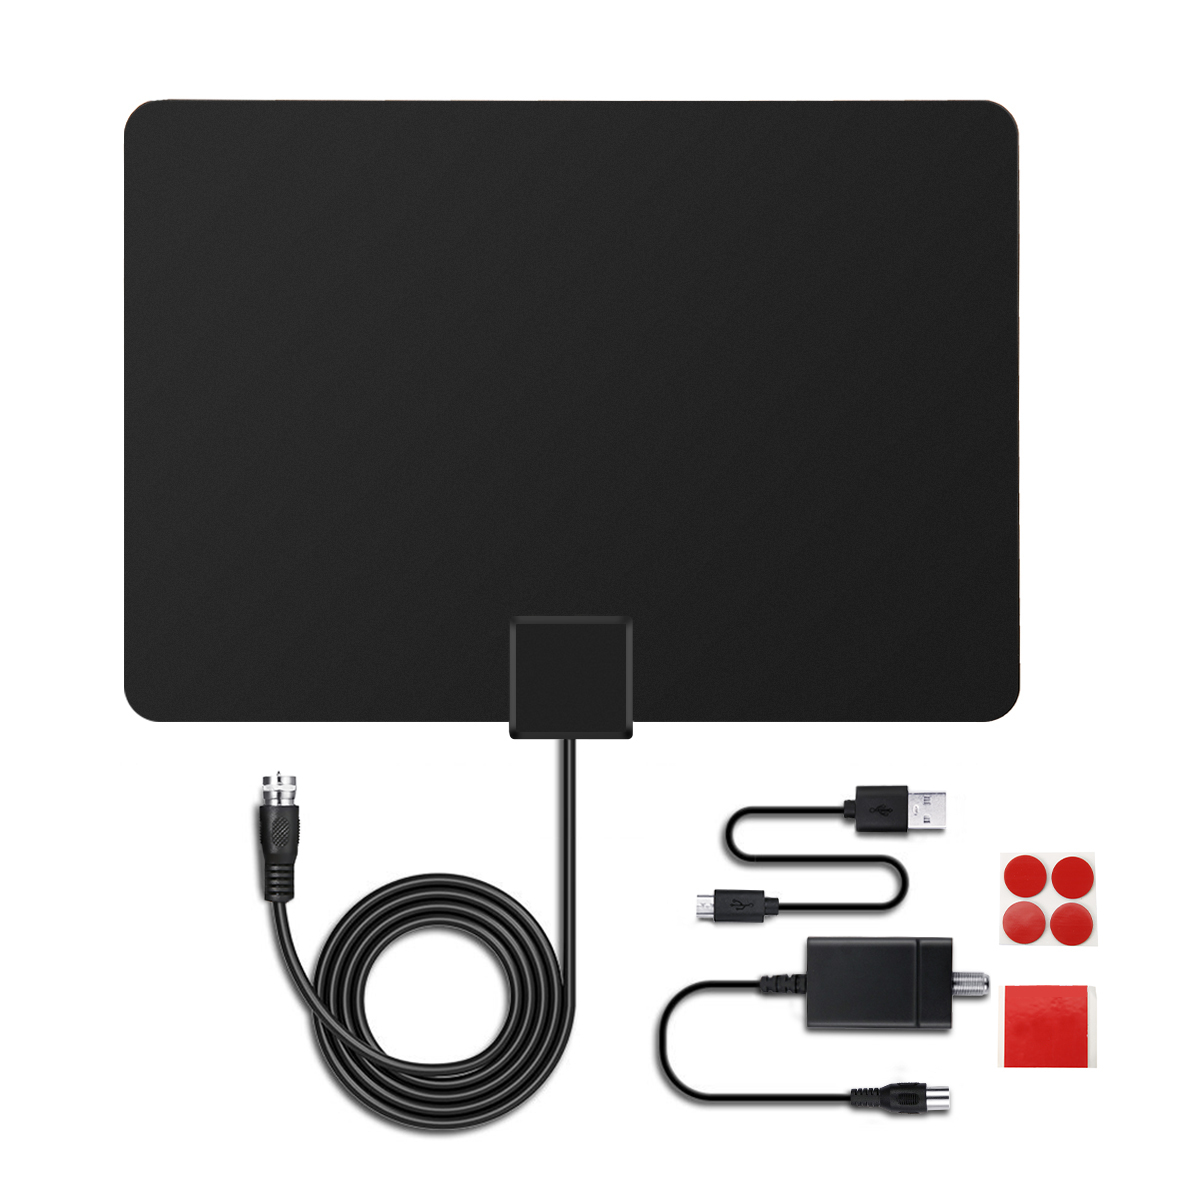 MECO TV Antenna Indoor TV Antenna Ultra-thin Amplified 50-mile digital HDTV antenna with amplifier signal amplifier and 16.5-foot cable, digital DVB-T and analog TV signals